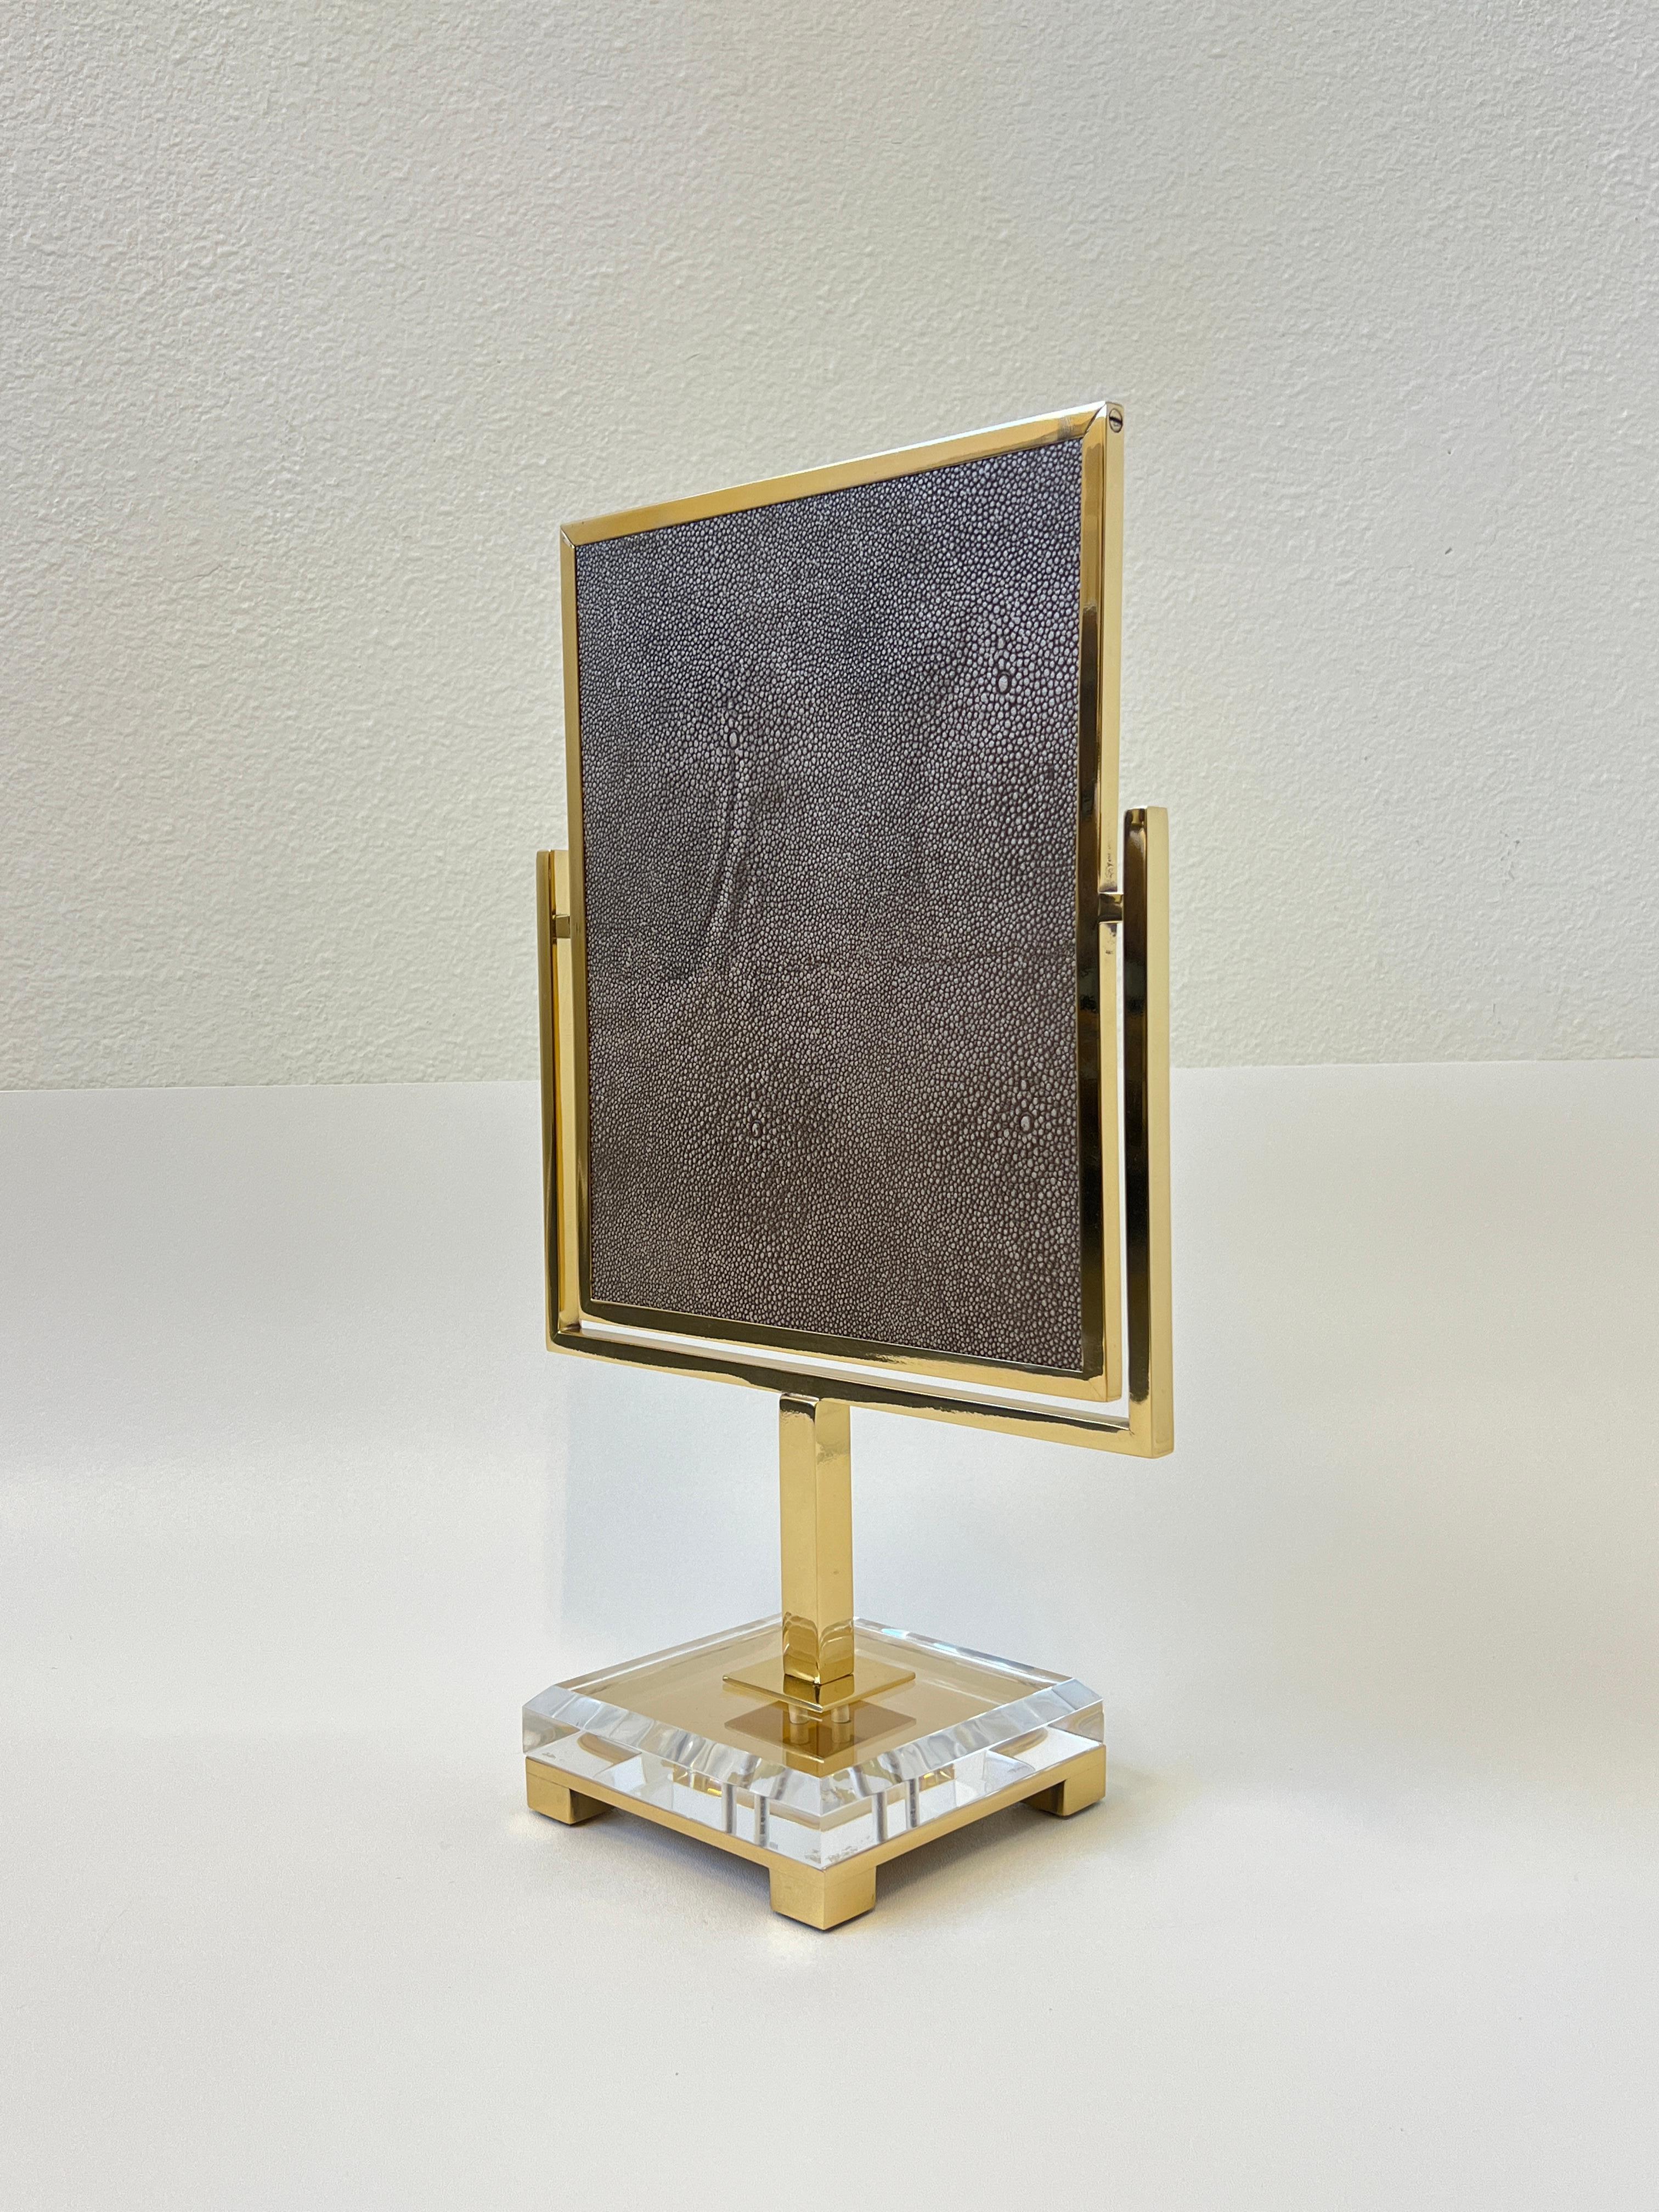 A glamorous polish brass and clear acrylic vanity mirror by Charles Hollis Jones.
The mirror has brown faux shagreen leather on the back. This was designed by Charles in the 1970s. 
Newly re-plated in polished brass finished and new